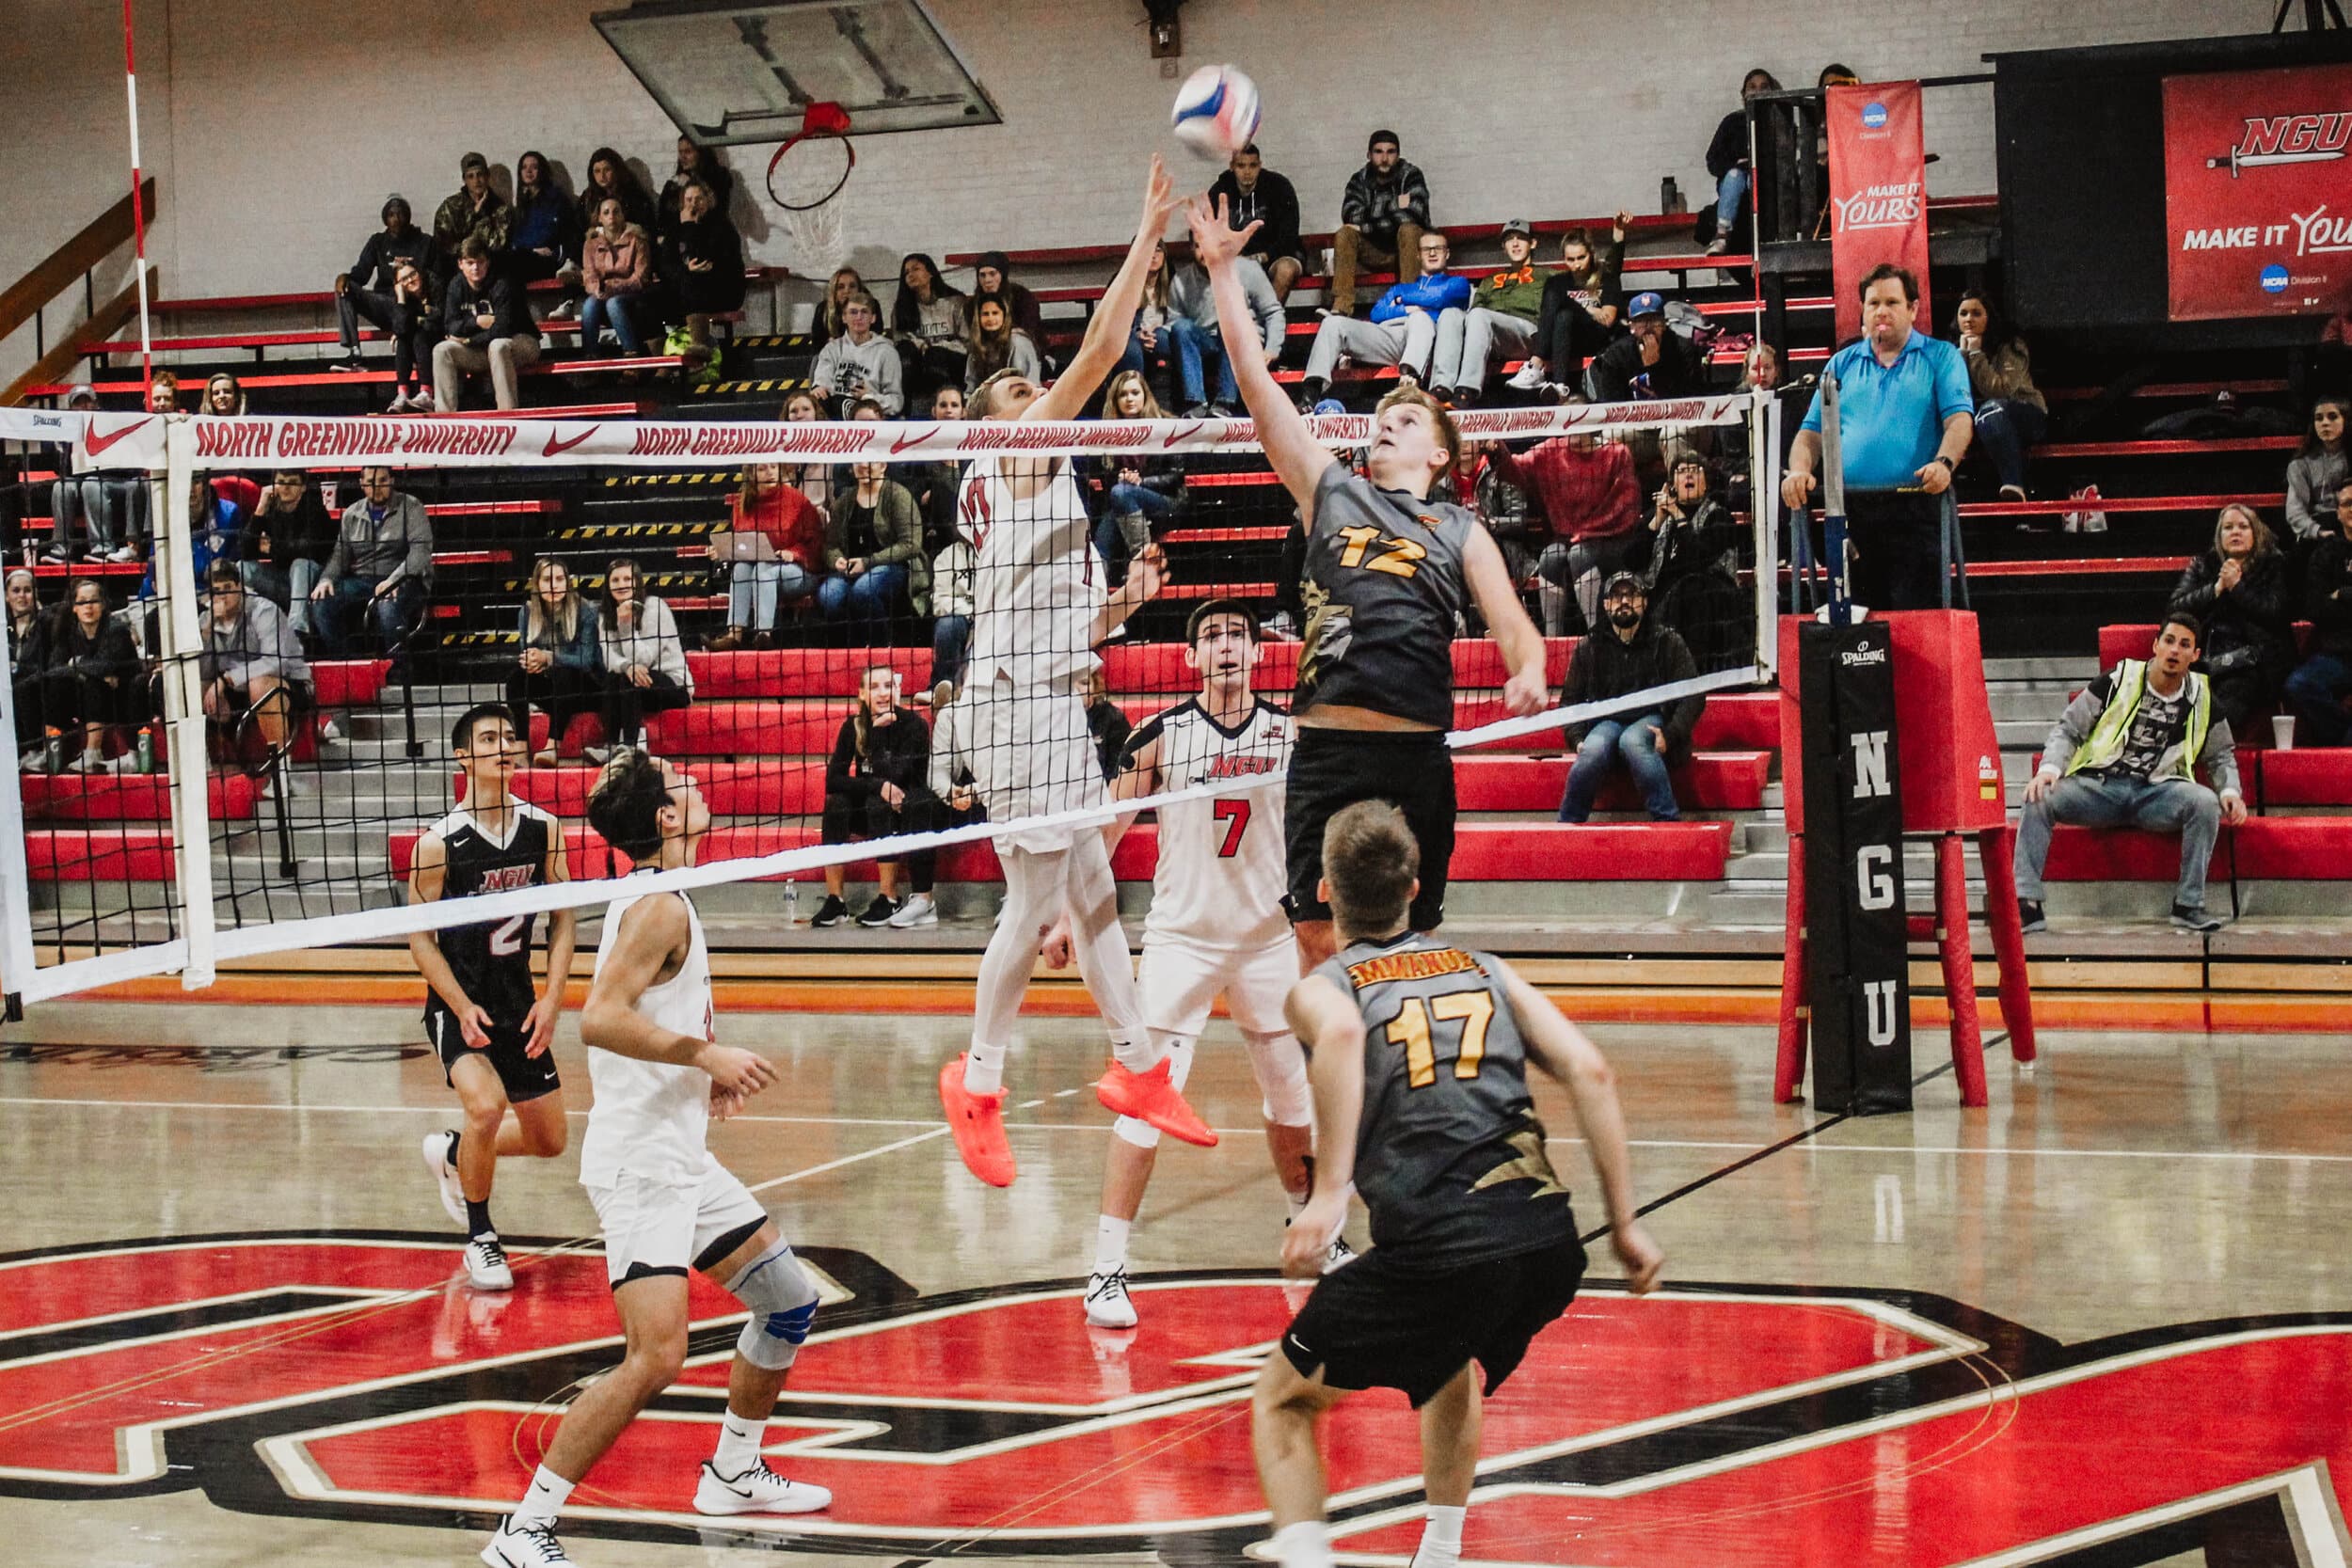 Brandon Baker (10), a junior, and an Emmanuel player both jump attempting to hit the ball over the net to their opponents side.